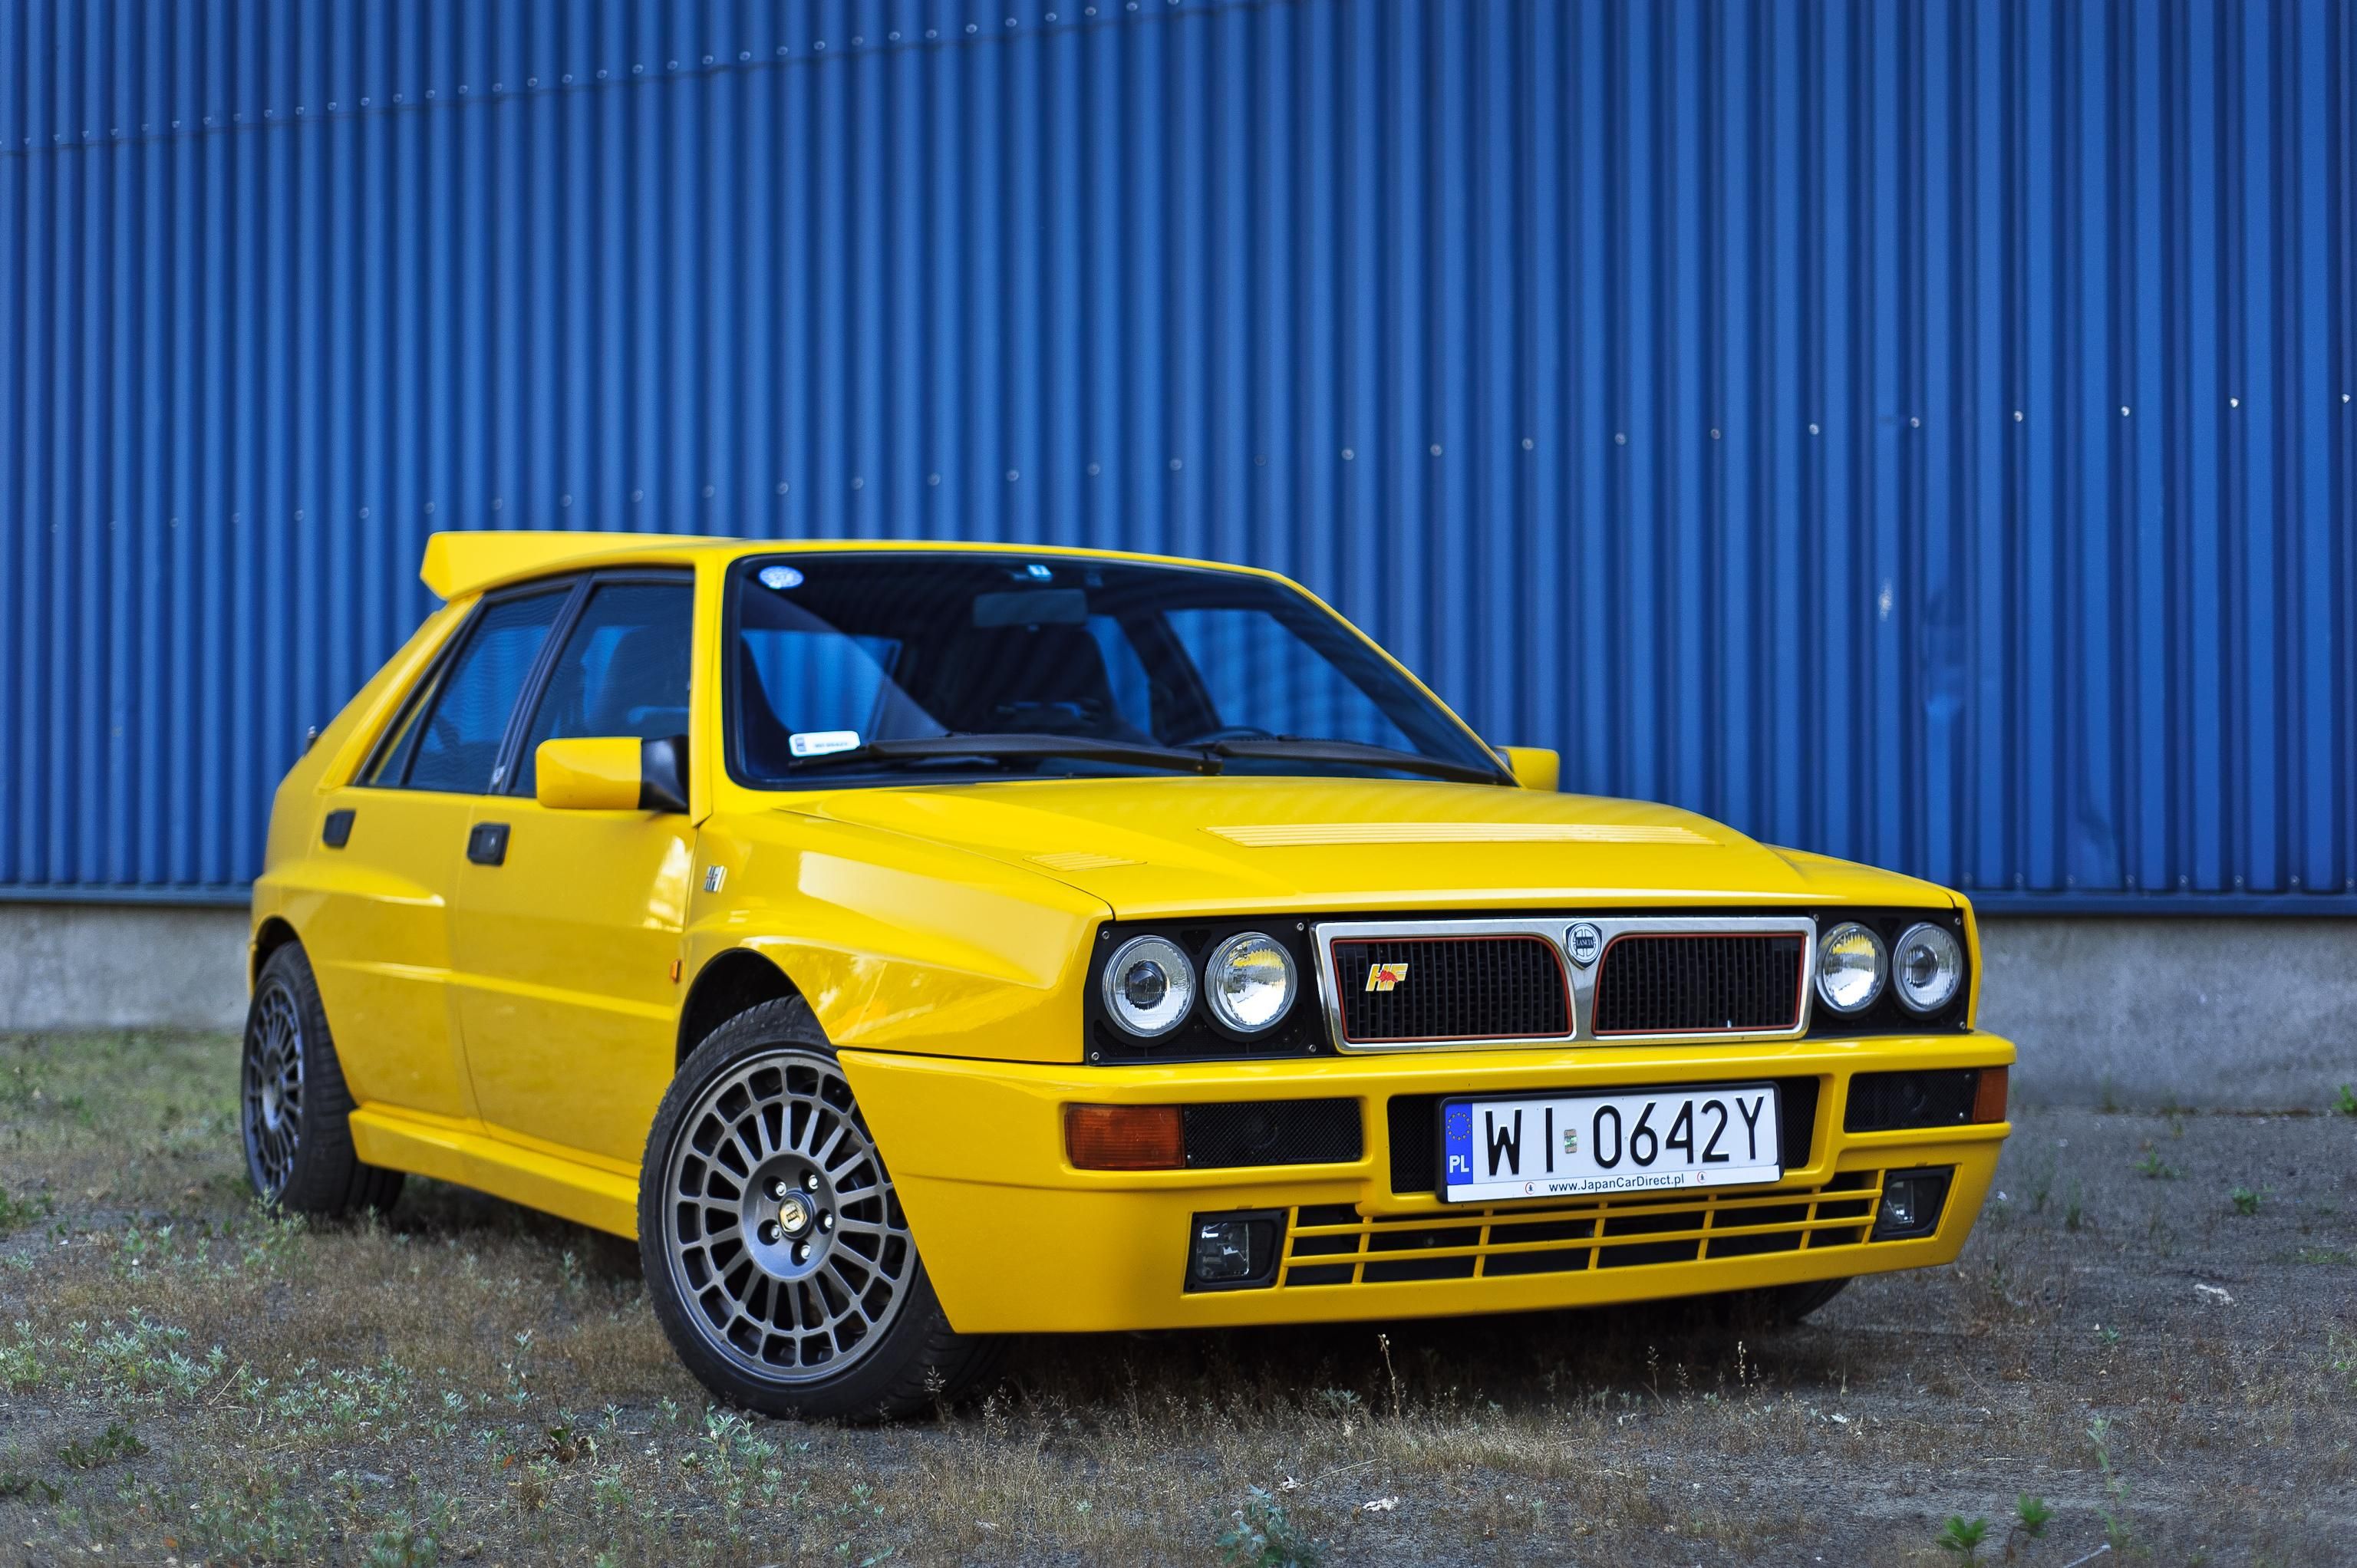 The Sexiest Lancia Ever